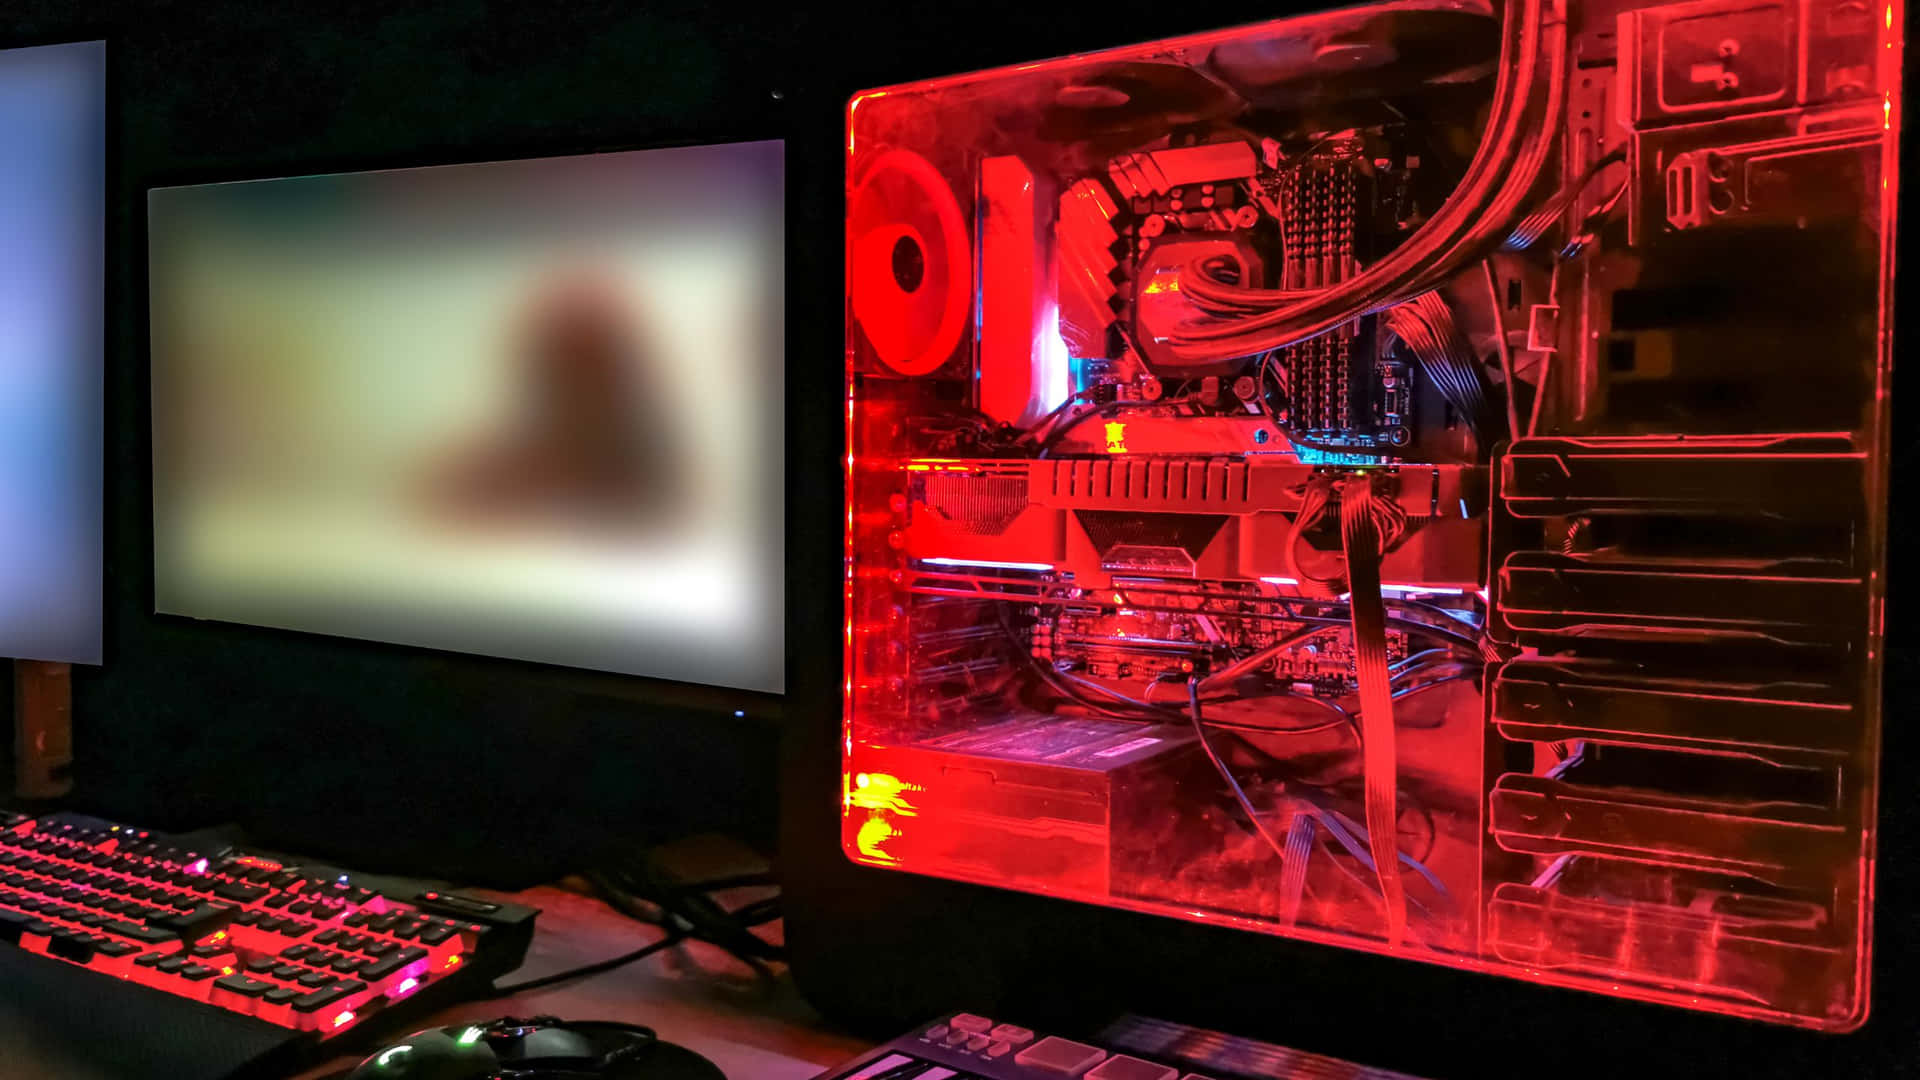 "Take your work to the next level with this powerful Red PC!" Wallpaper